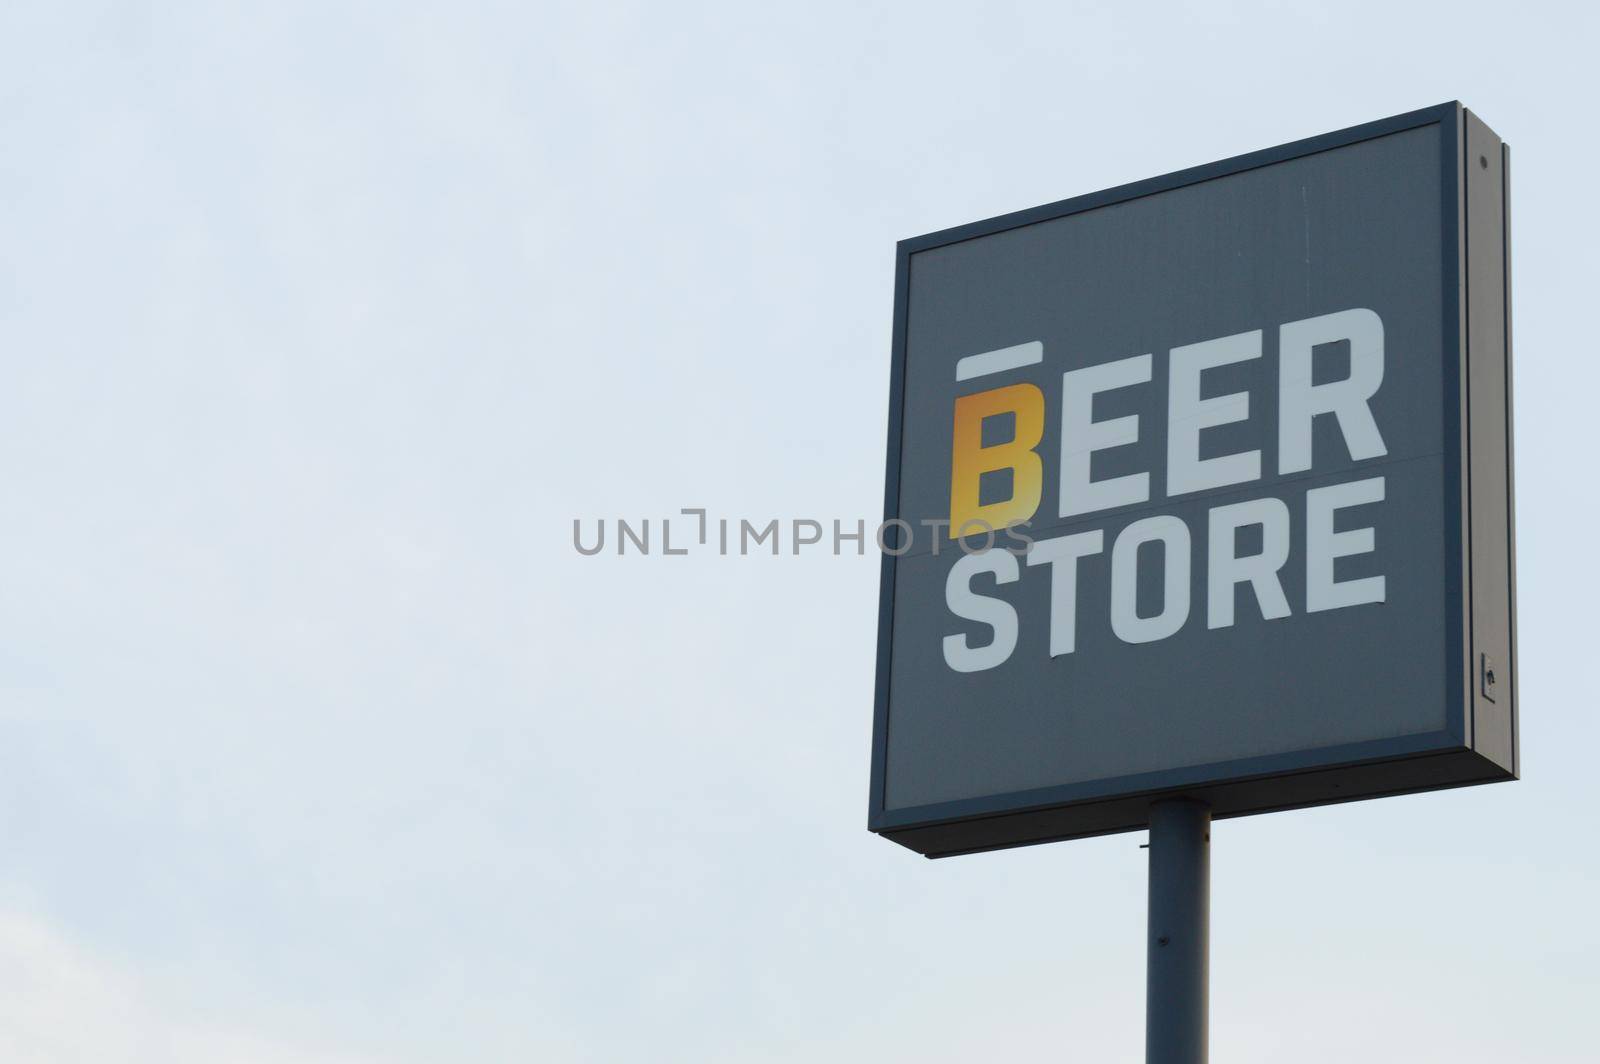 The Beer Store Sign by AlphaBaby